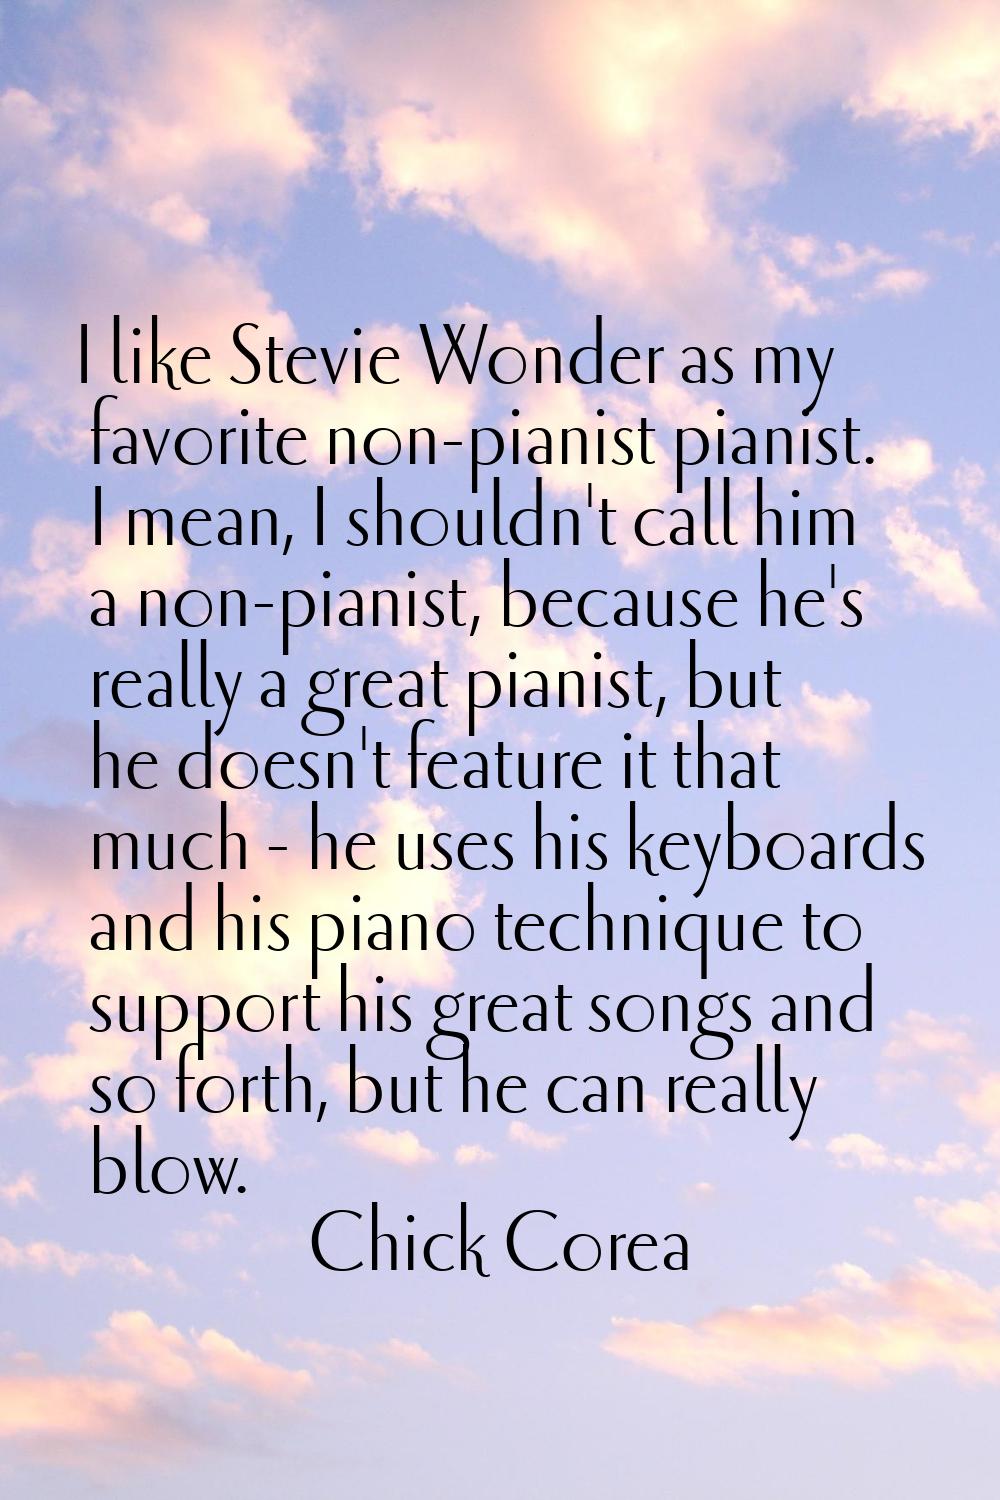 I like Stevie Wonder as my favorite non-pianist pianist. I mean, I shouldn't call him a non-pianist